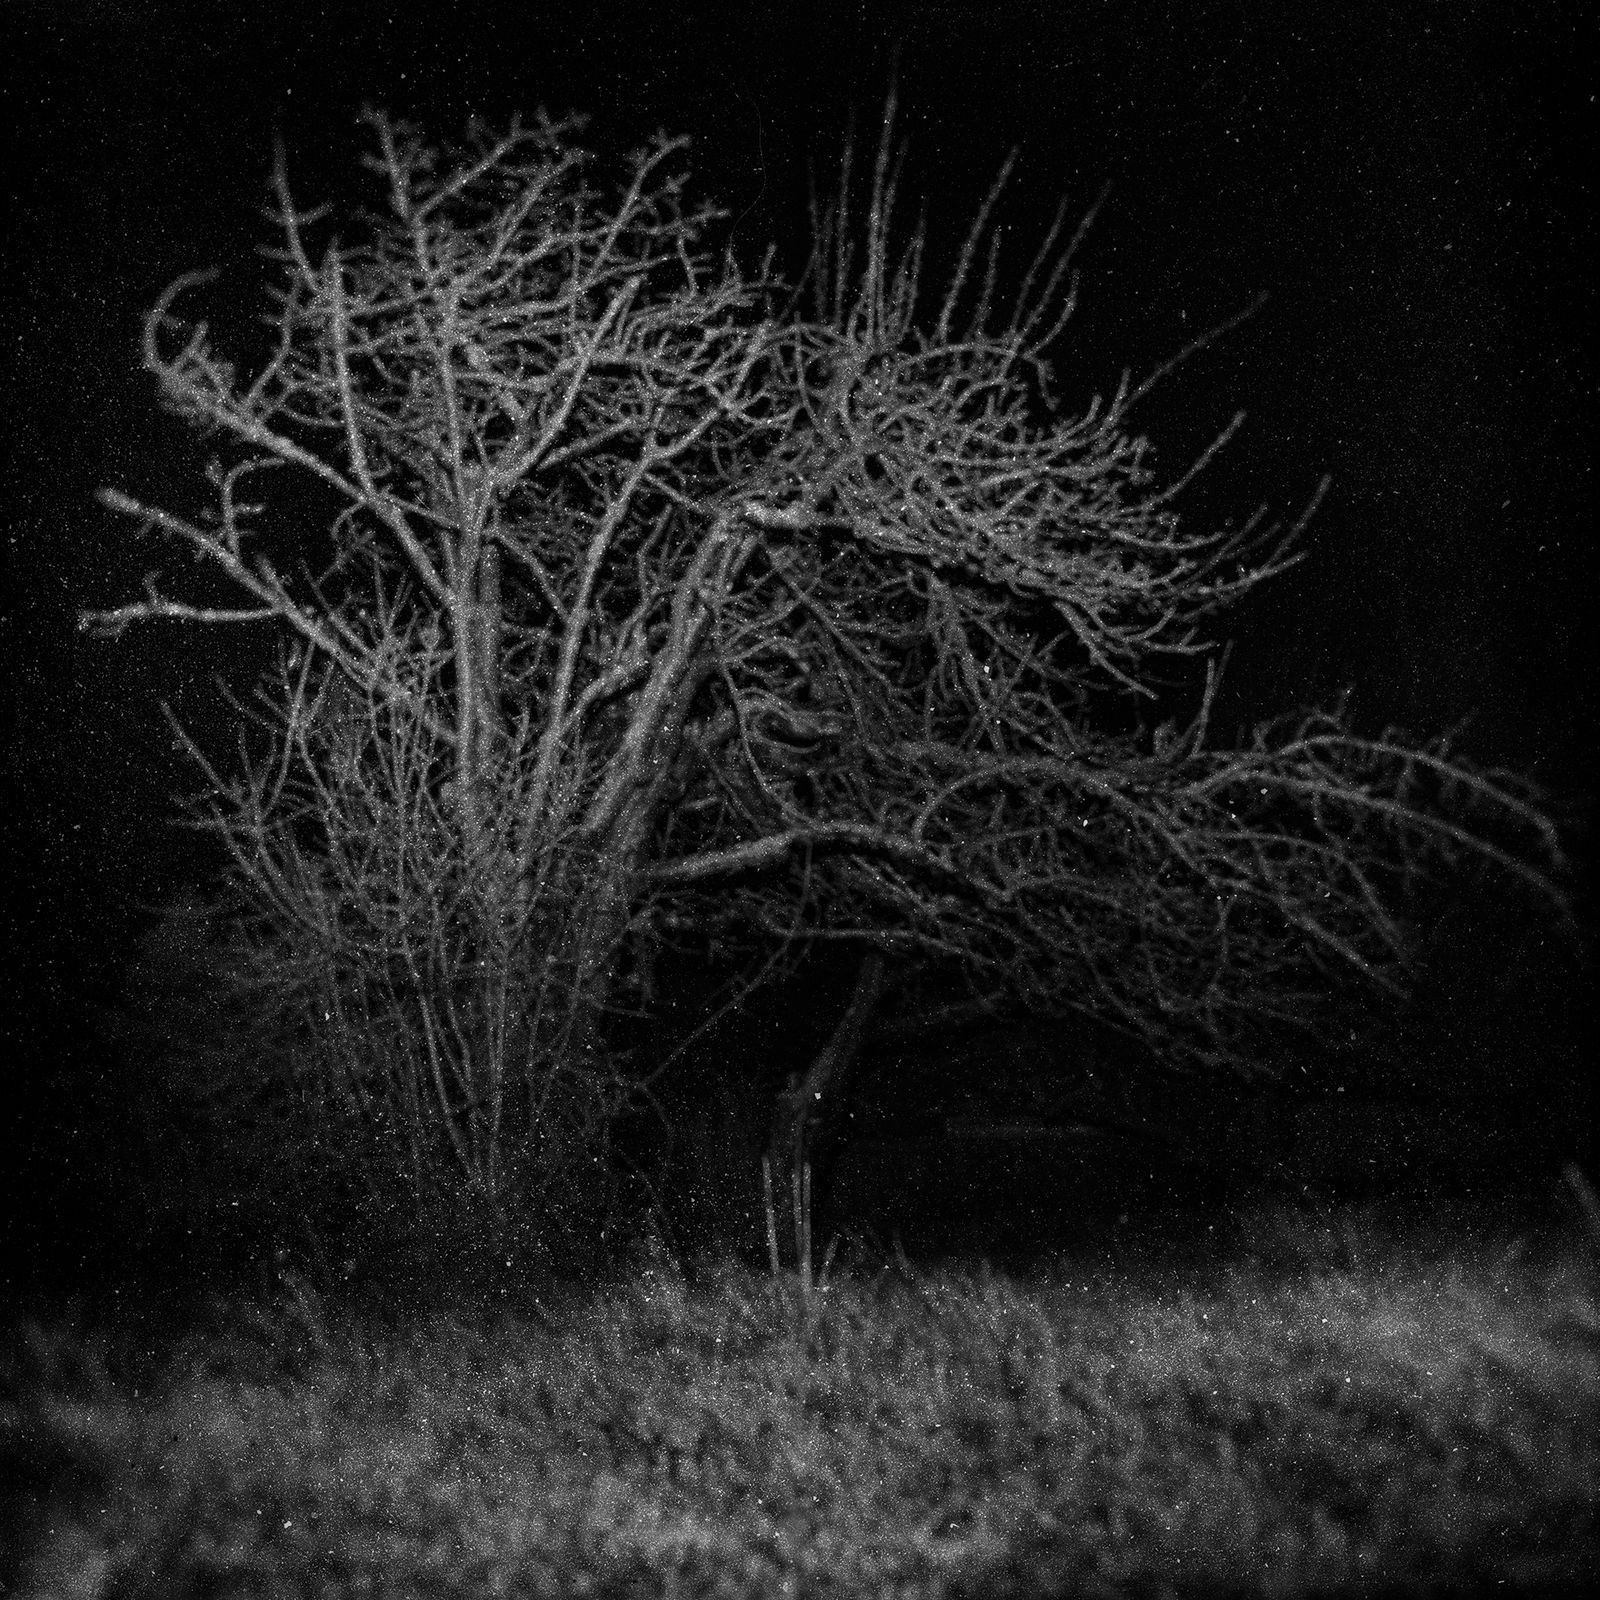 © Tirdad Aghakhani - The monster behind the tree